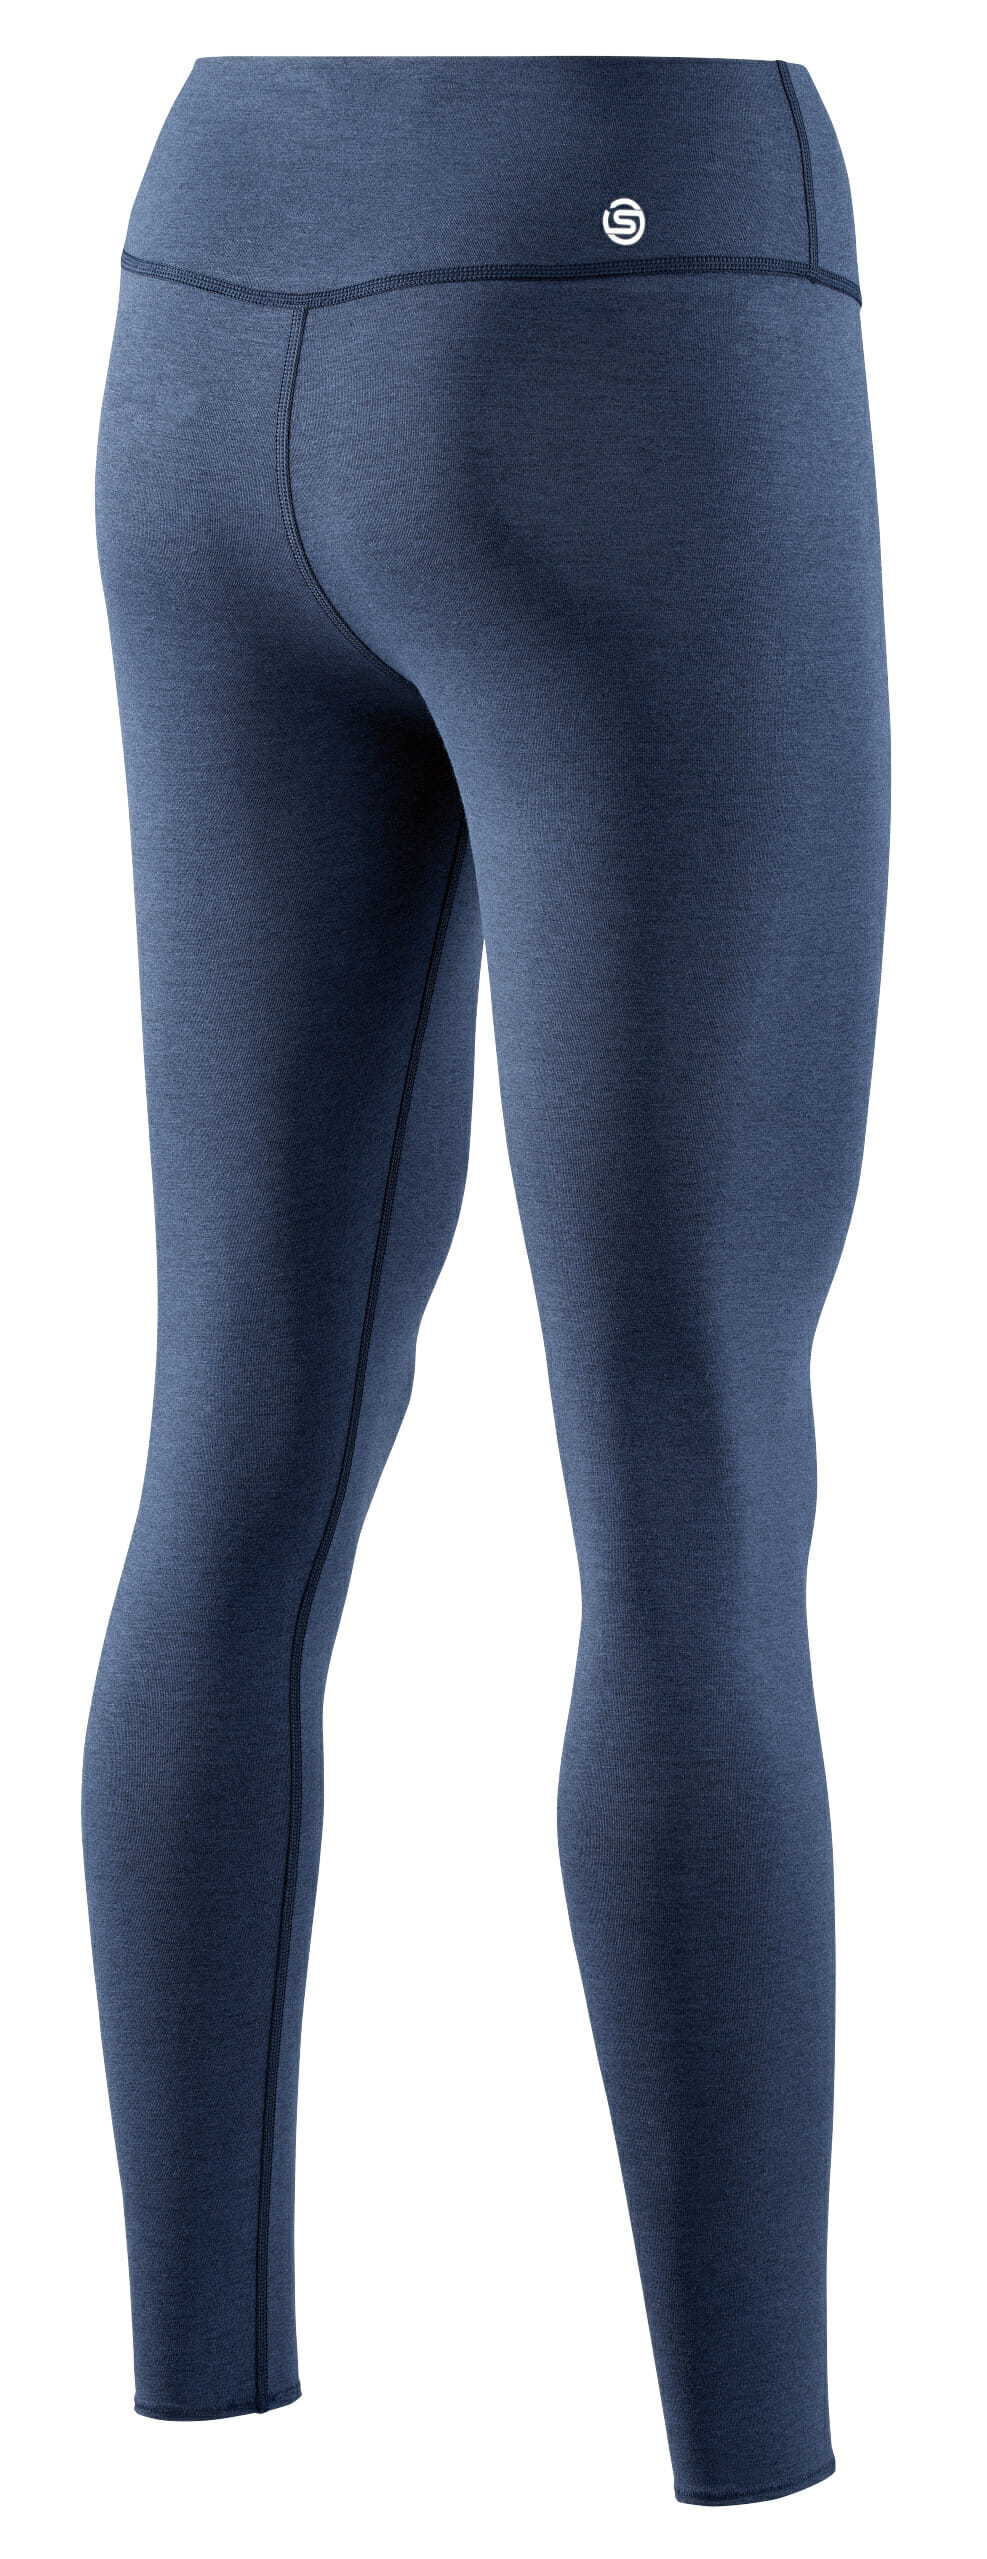 DNAmic Sleep Recovery Womens Long Tights Navy Blue/Marle - SKINS Compression  UK